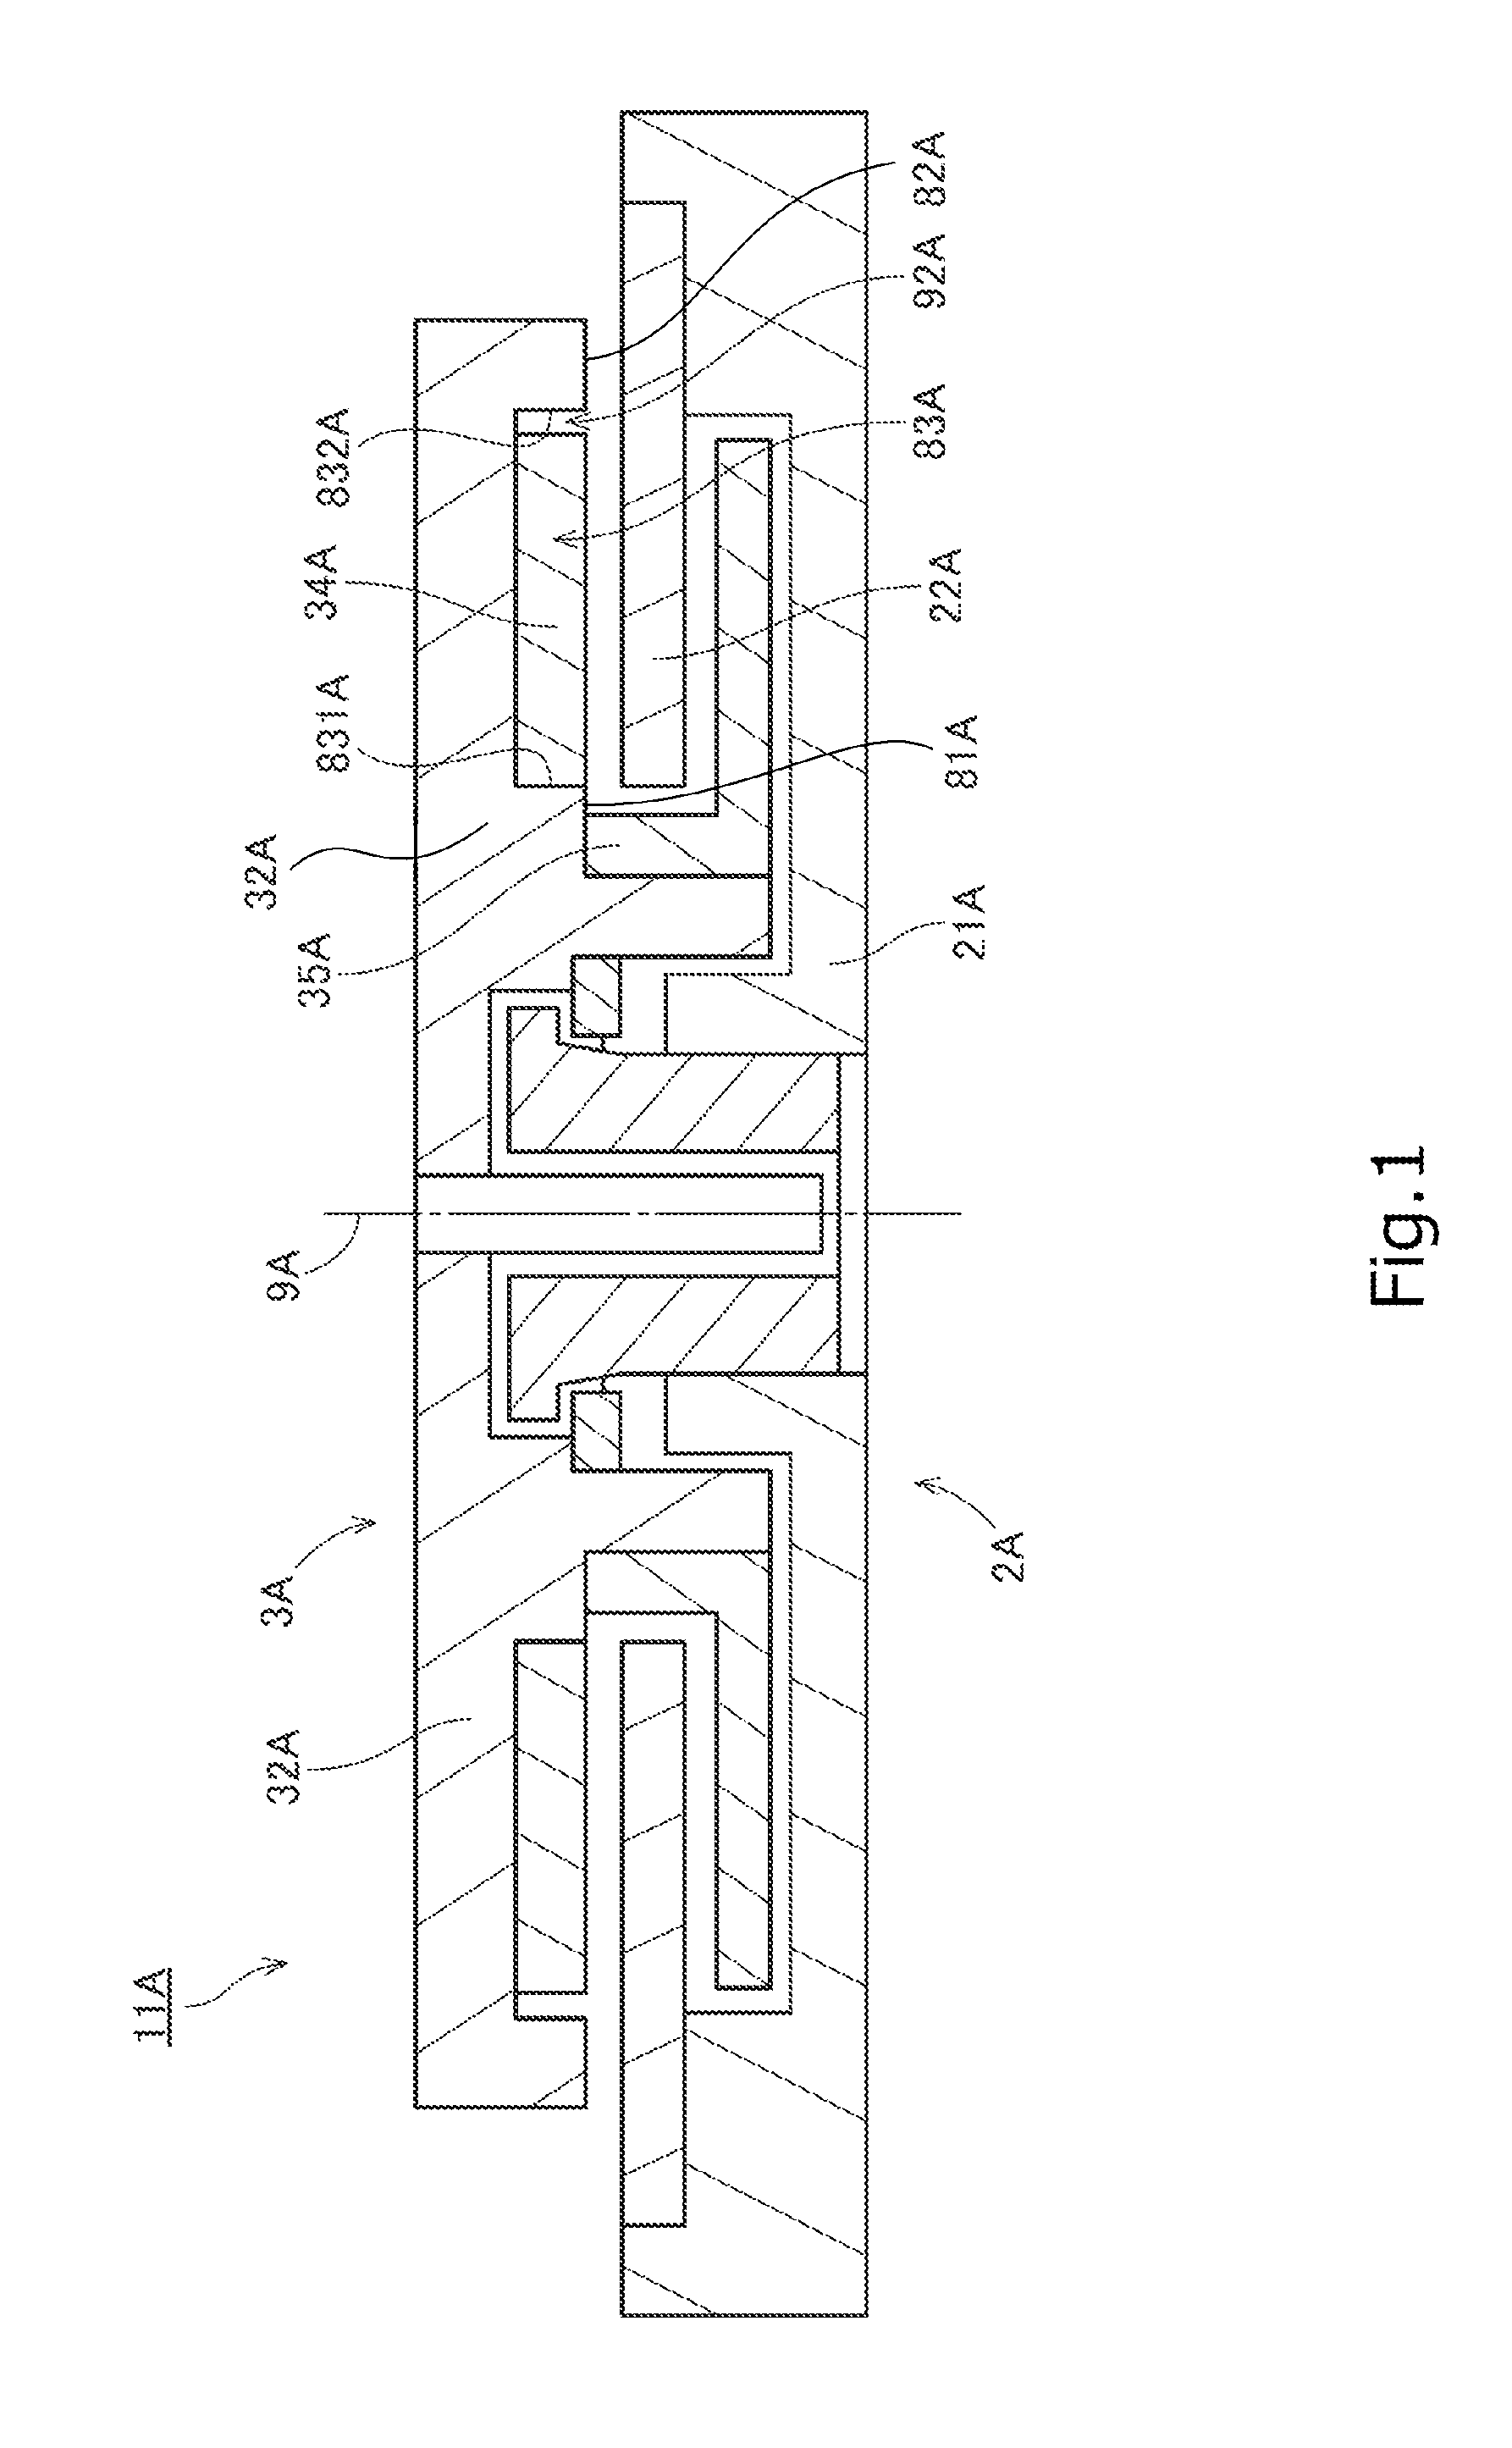 Brushless motor and disk drive apparatus